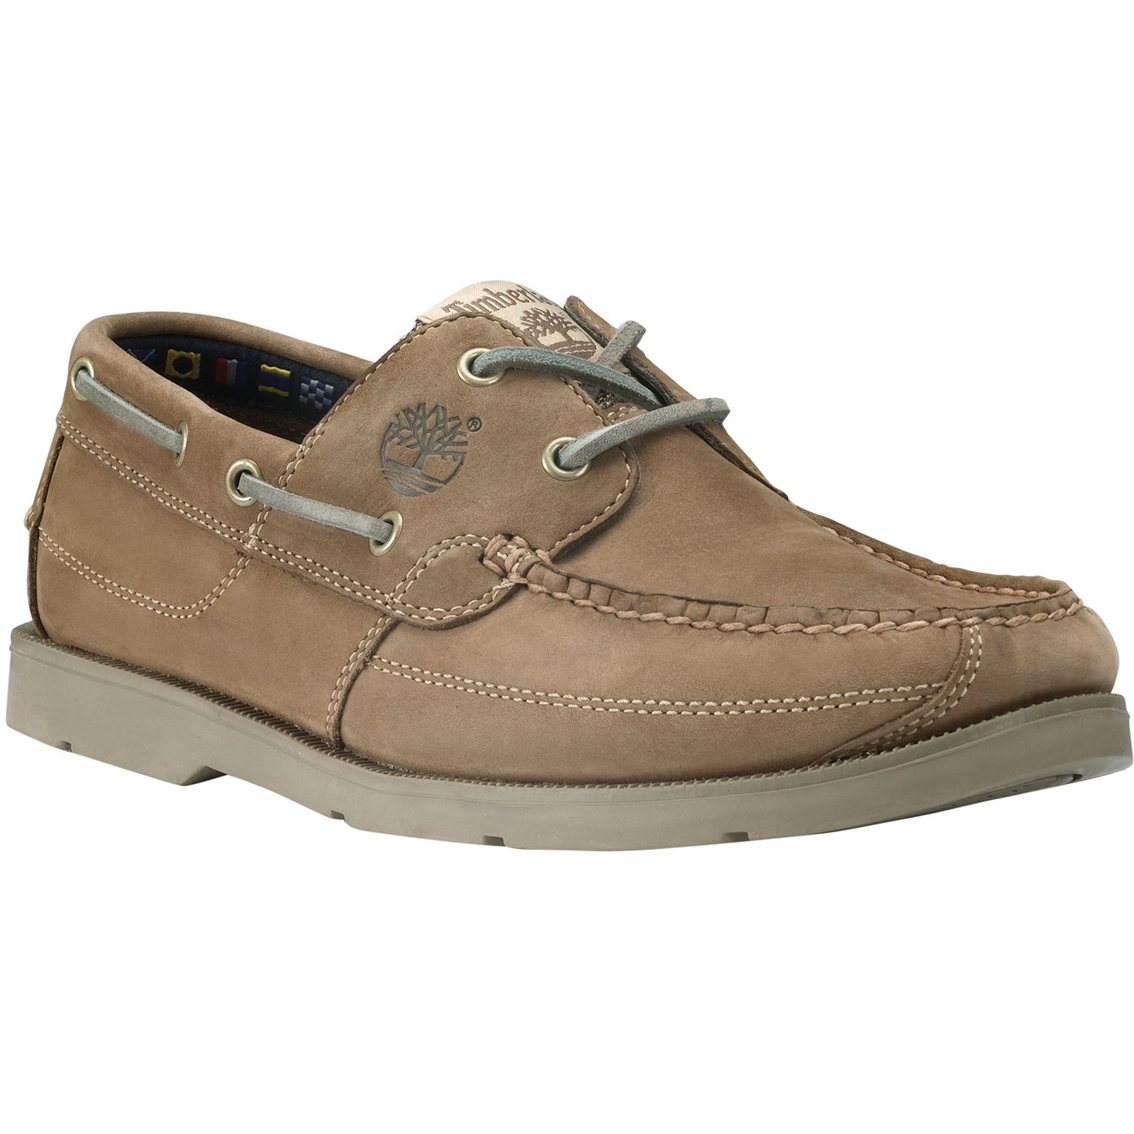 Timberland Men's Earthkeepers Kia Wah Bay Boat Shoes | Casuals | Shoes ...